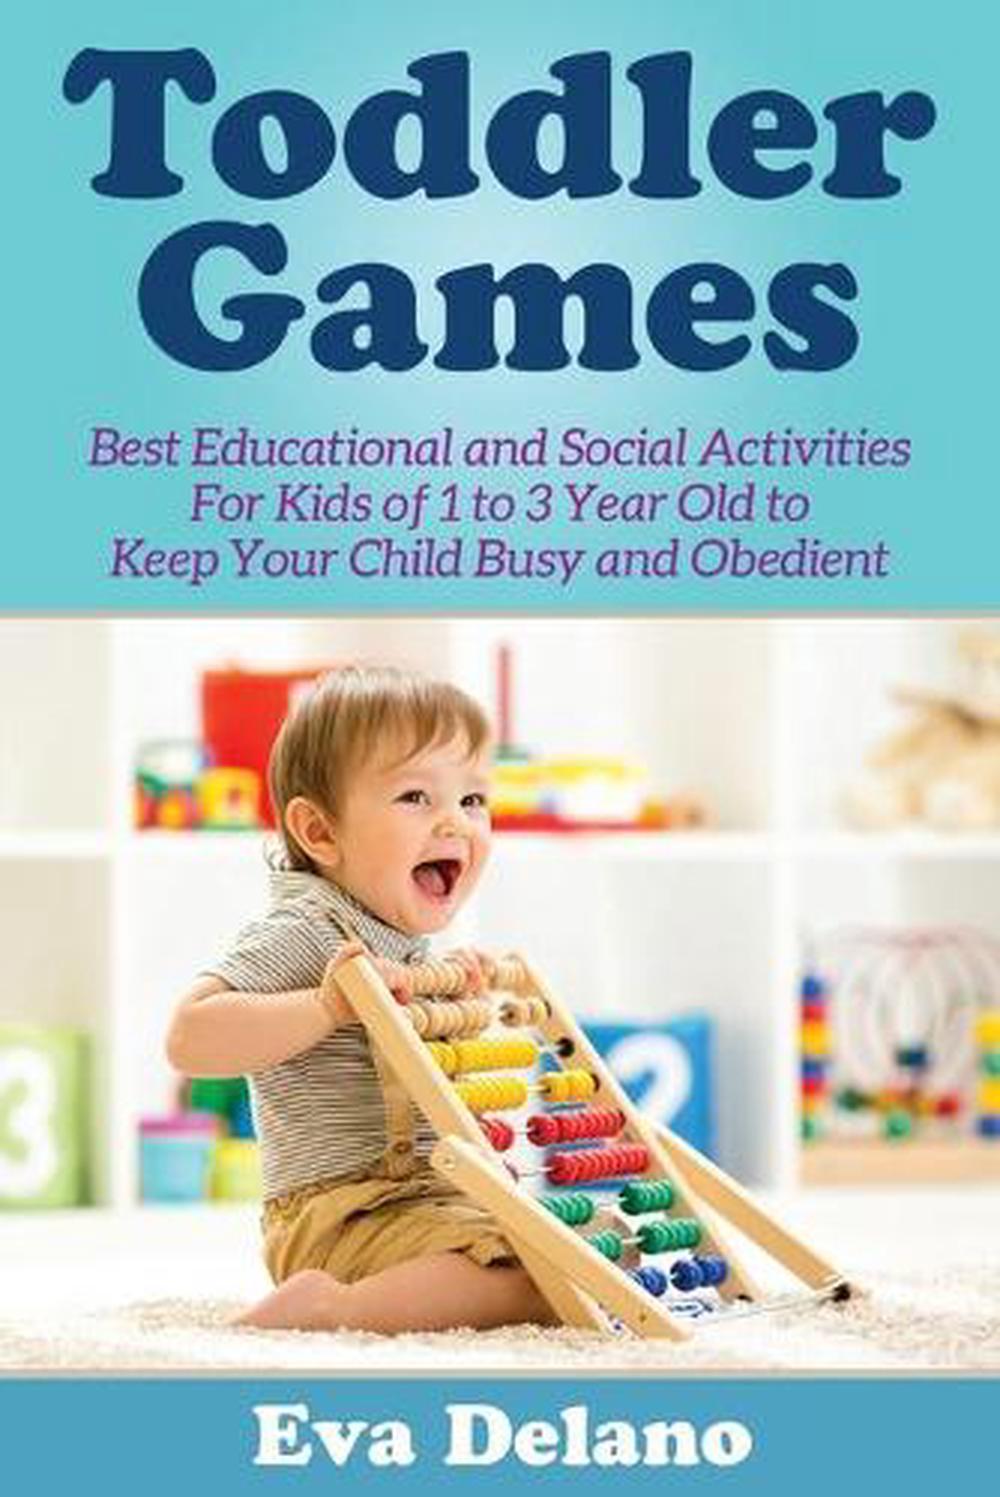 free learning games for 1 year old